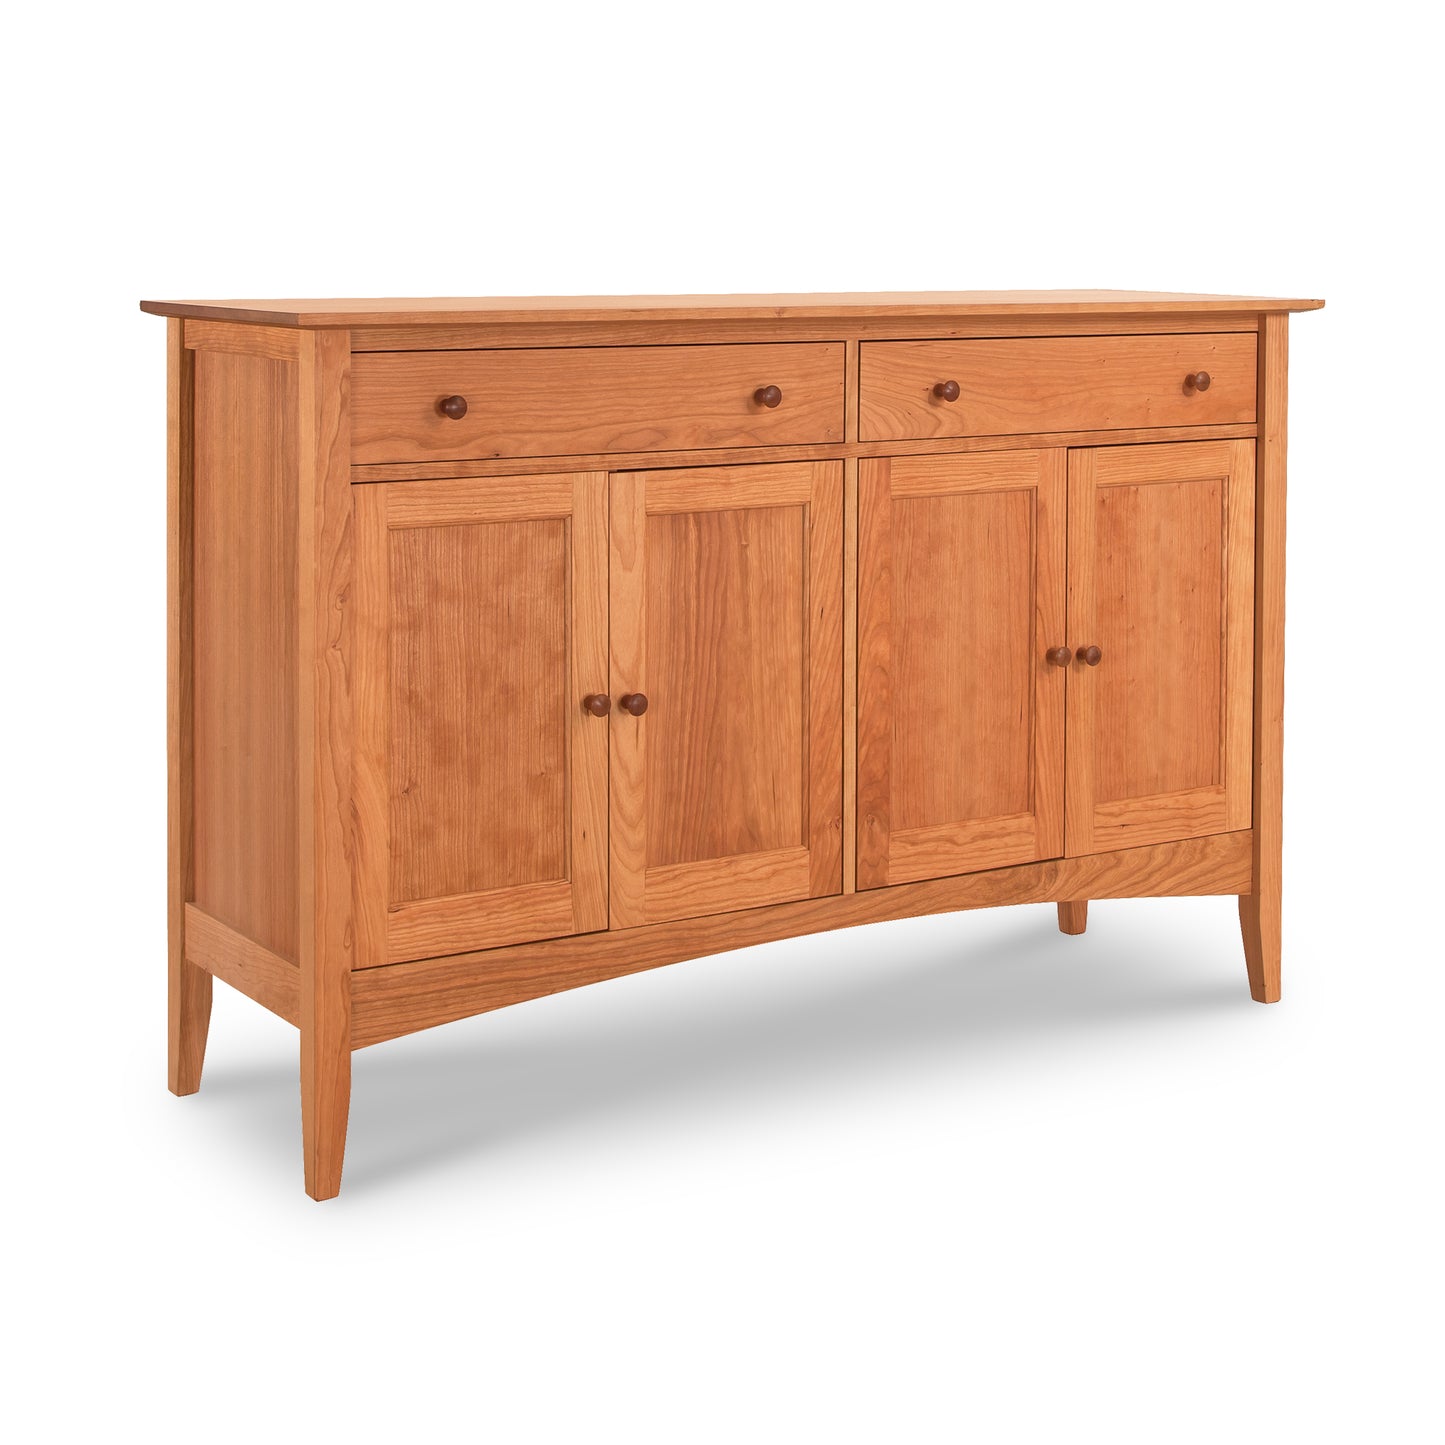 A large Maple Corner Woodworks American Shaker sideboard crafted from solid hardwood, featuring two drawers and three cabinet doors, set against a plain white background.